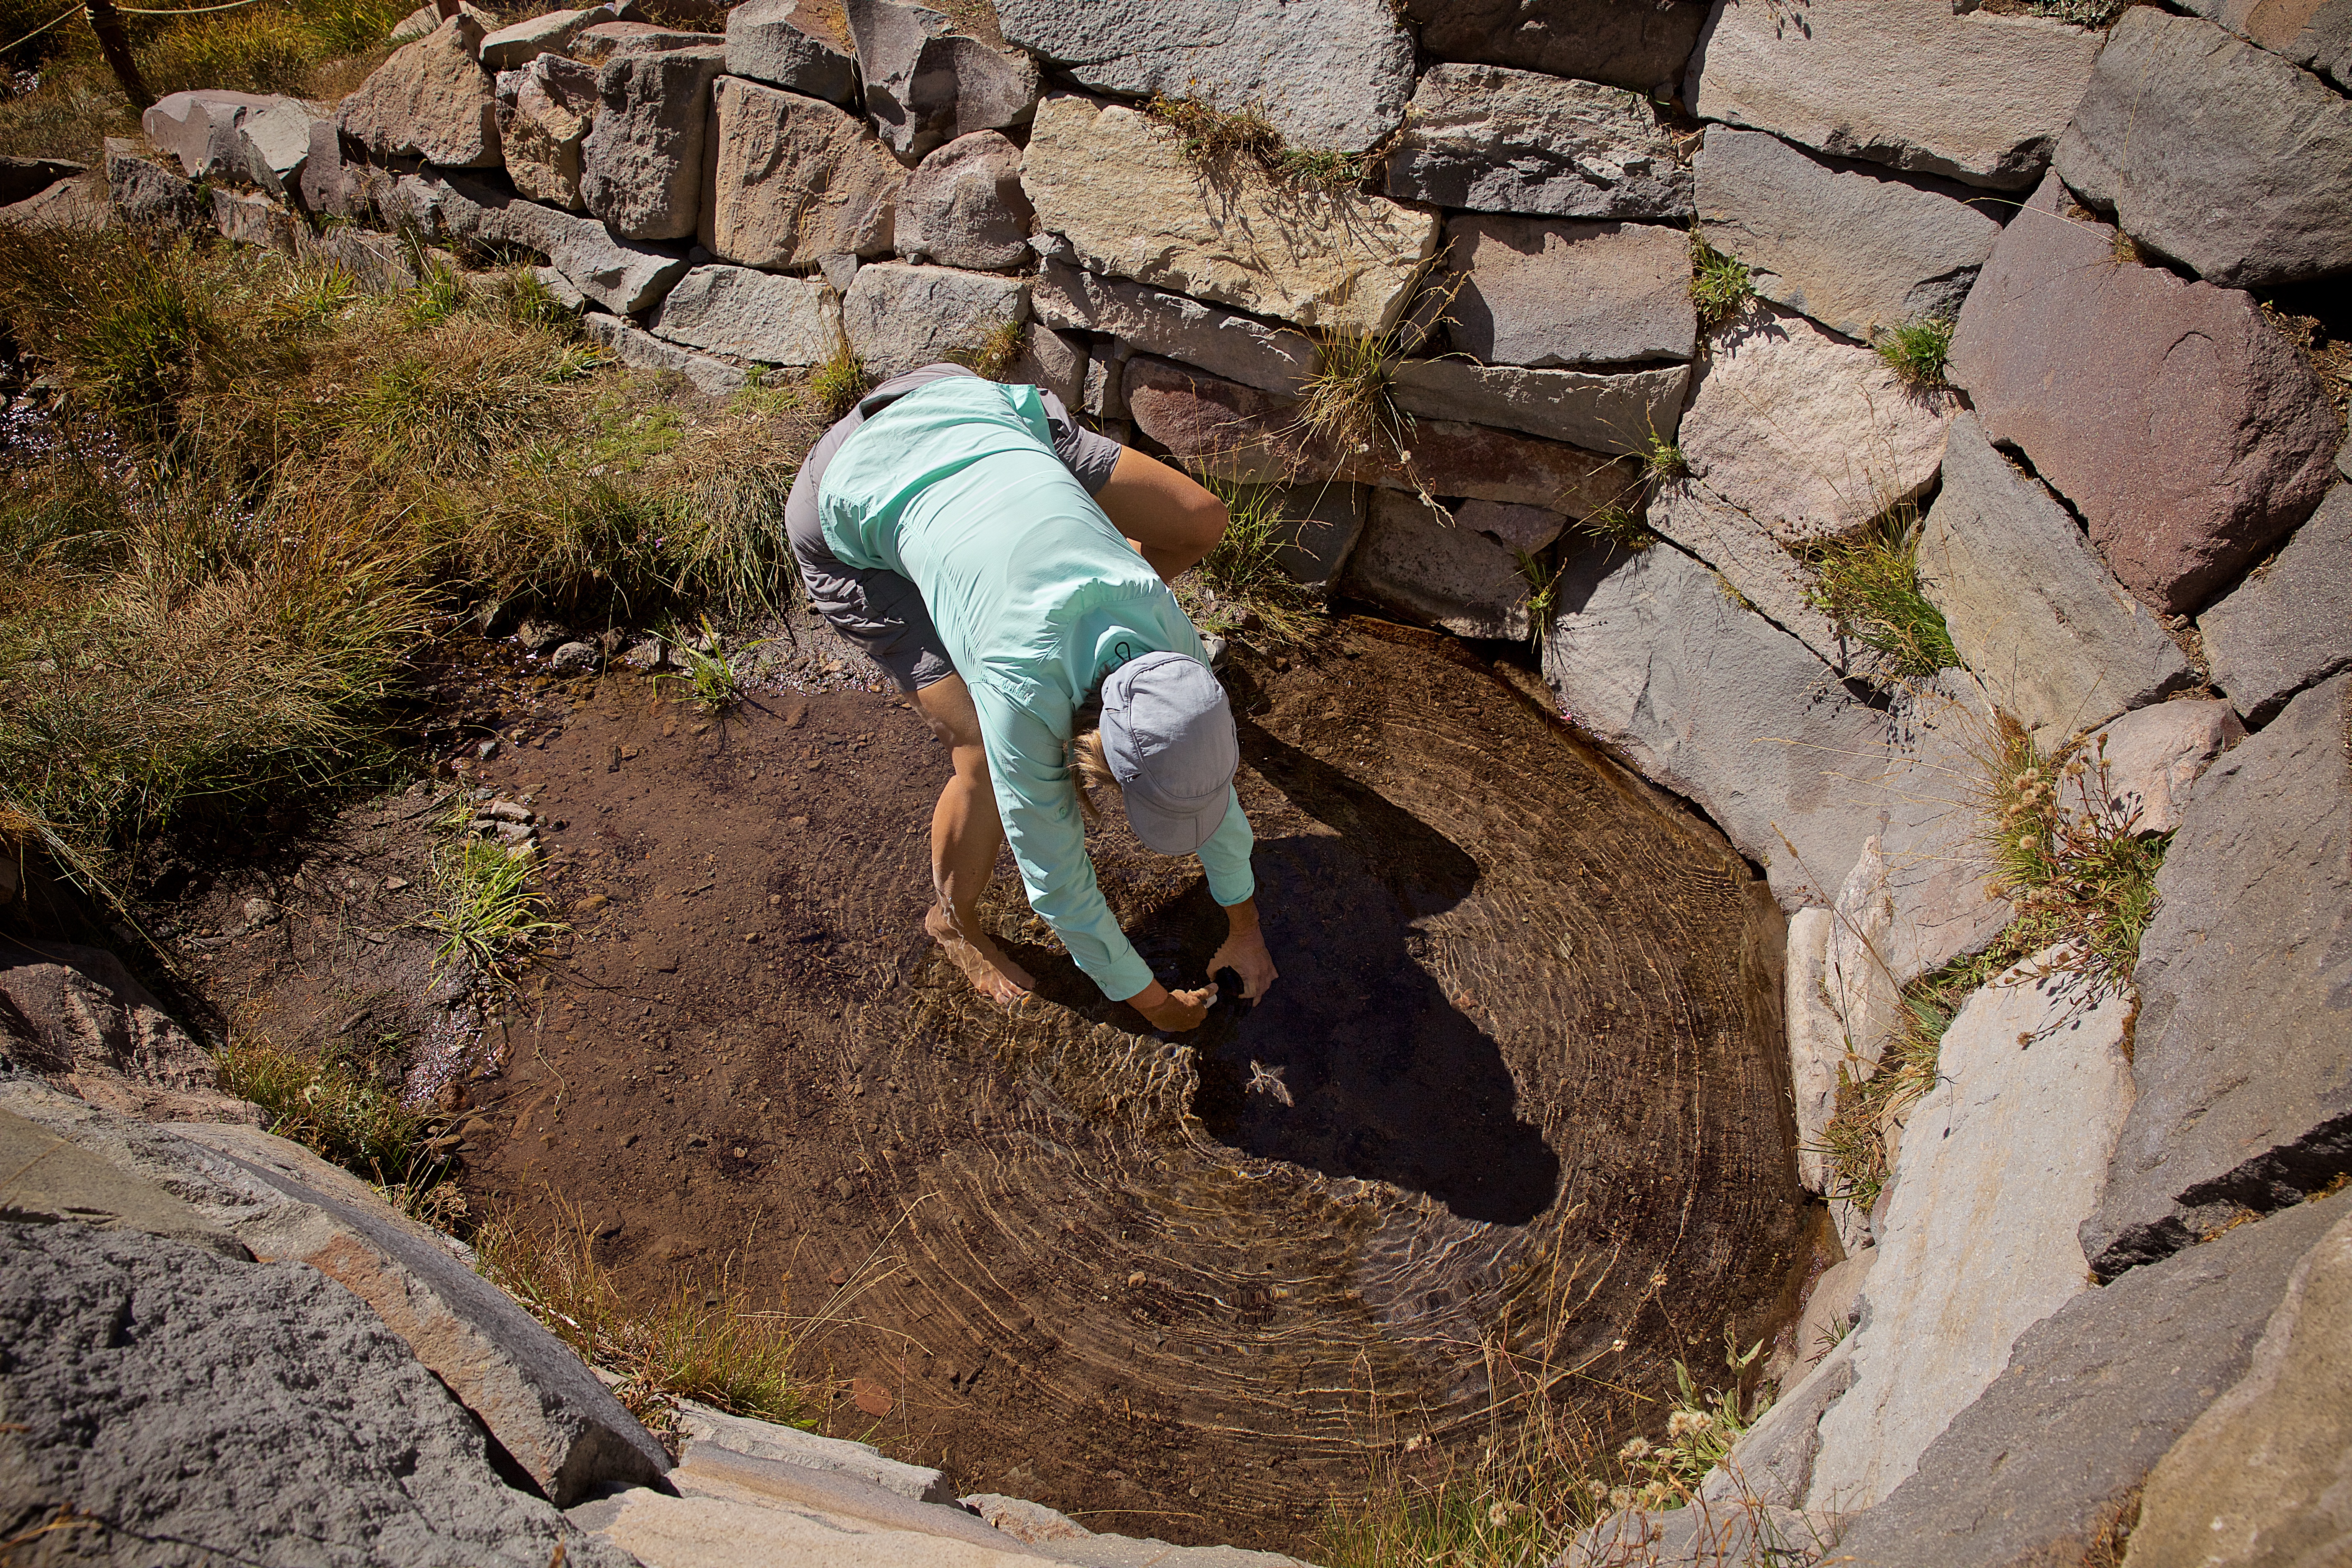 Dr. Jean Moran taking water samples from a pool beneath some Folded Sediments near San Andreas Fault